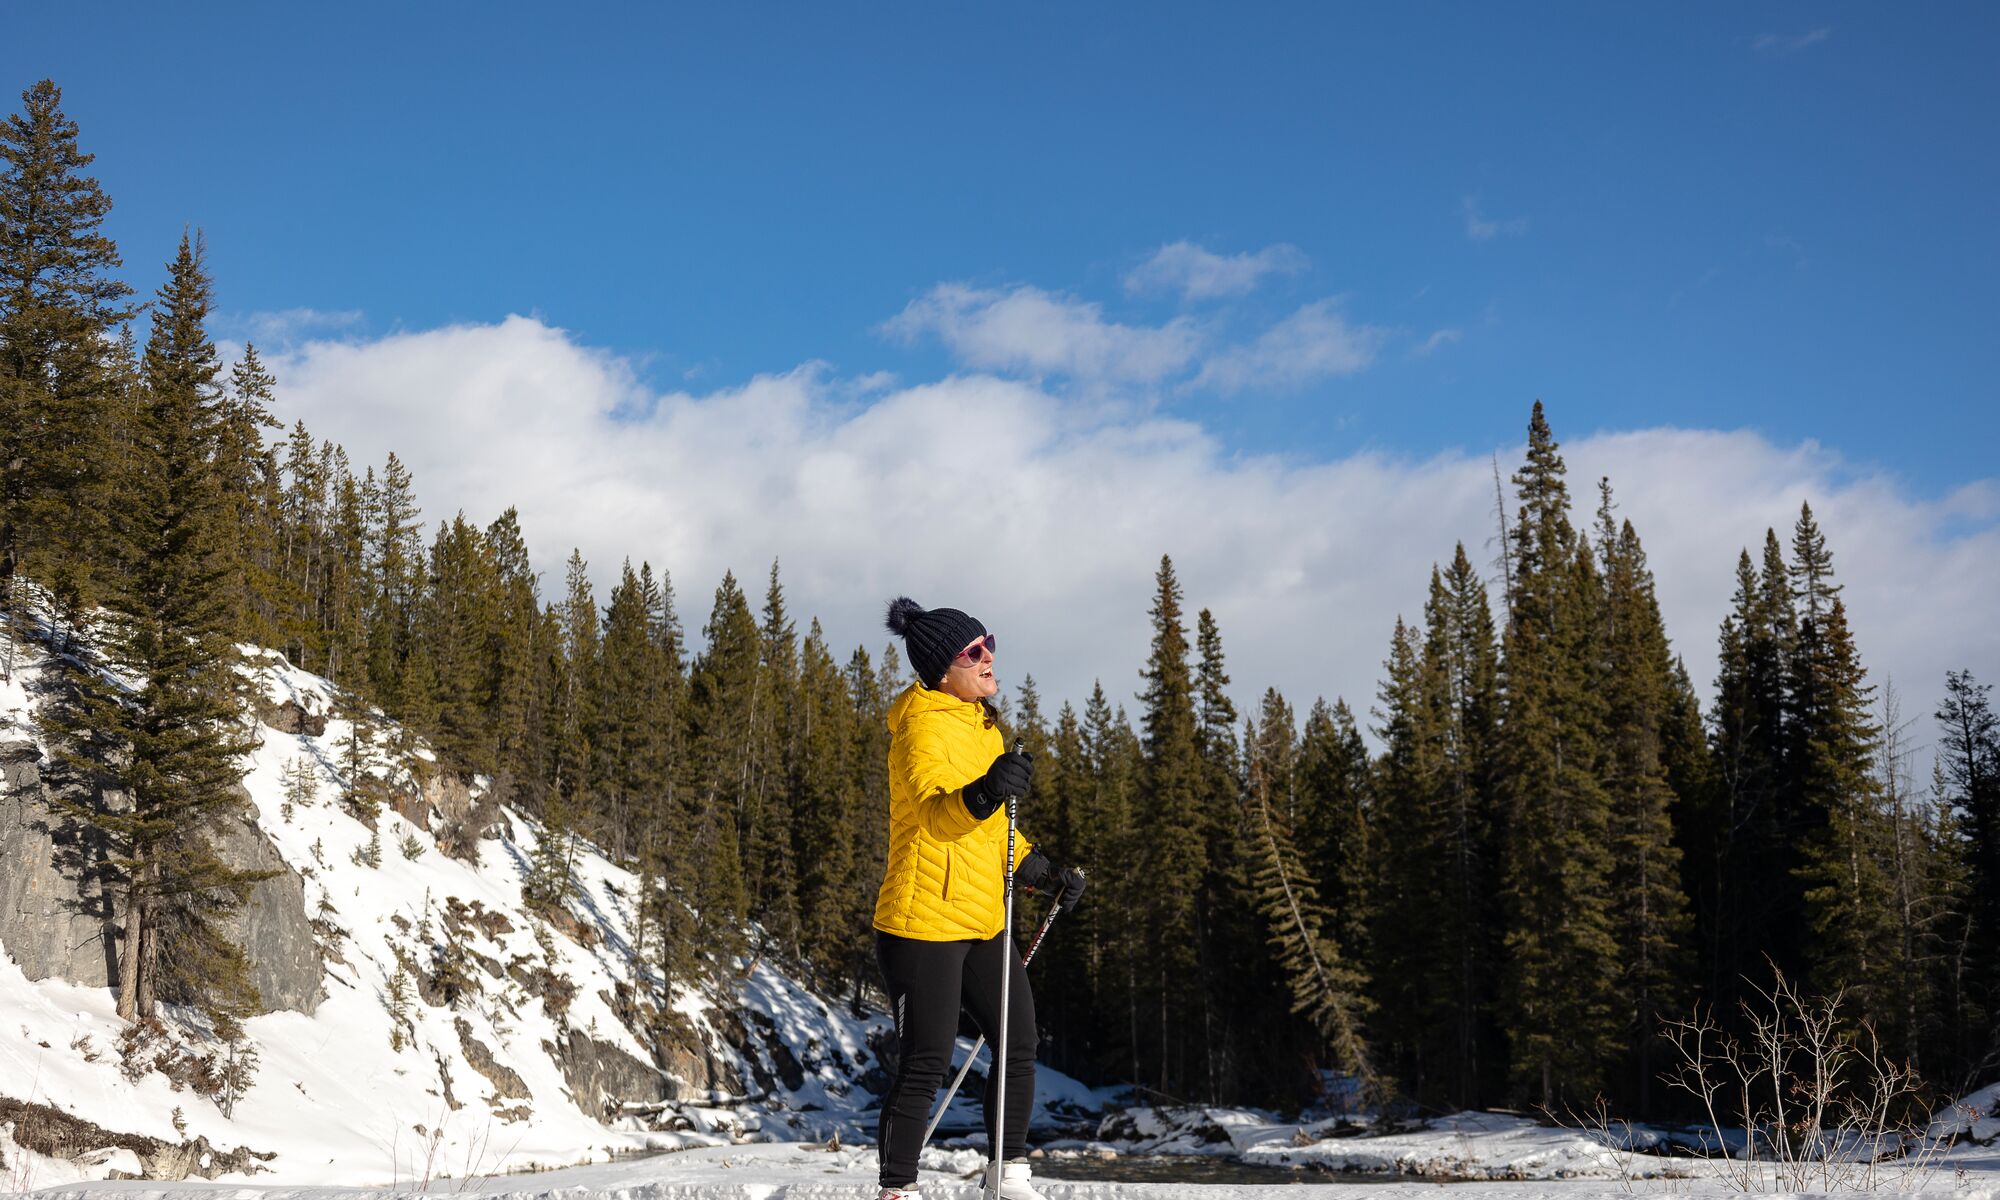 A woman in a yellow coat cross-country skis in Banff National Park.